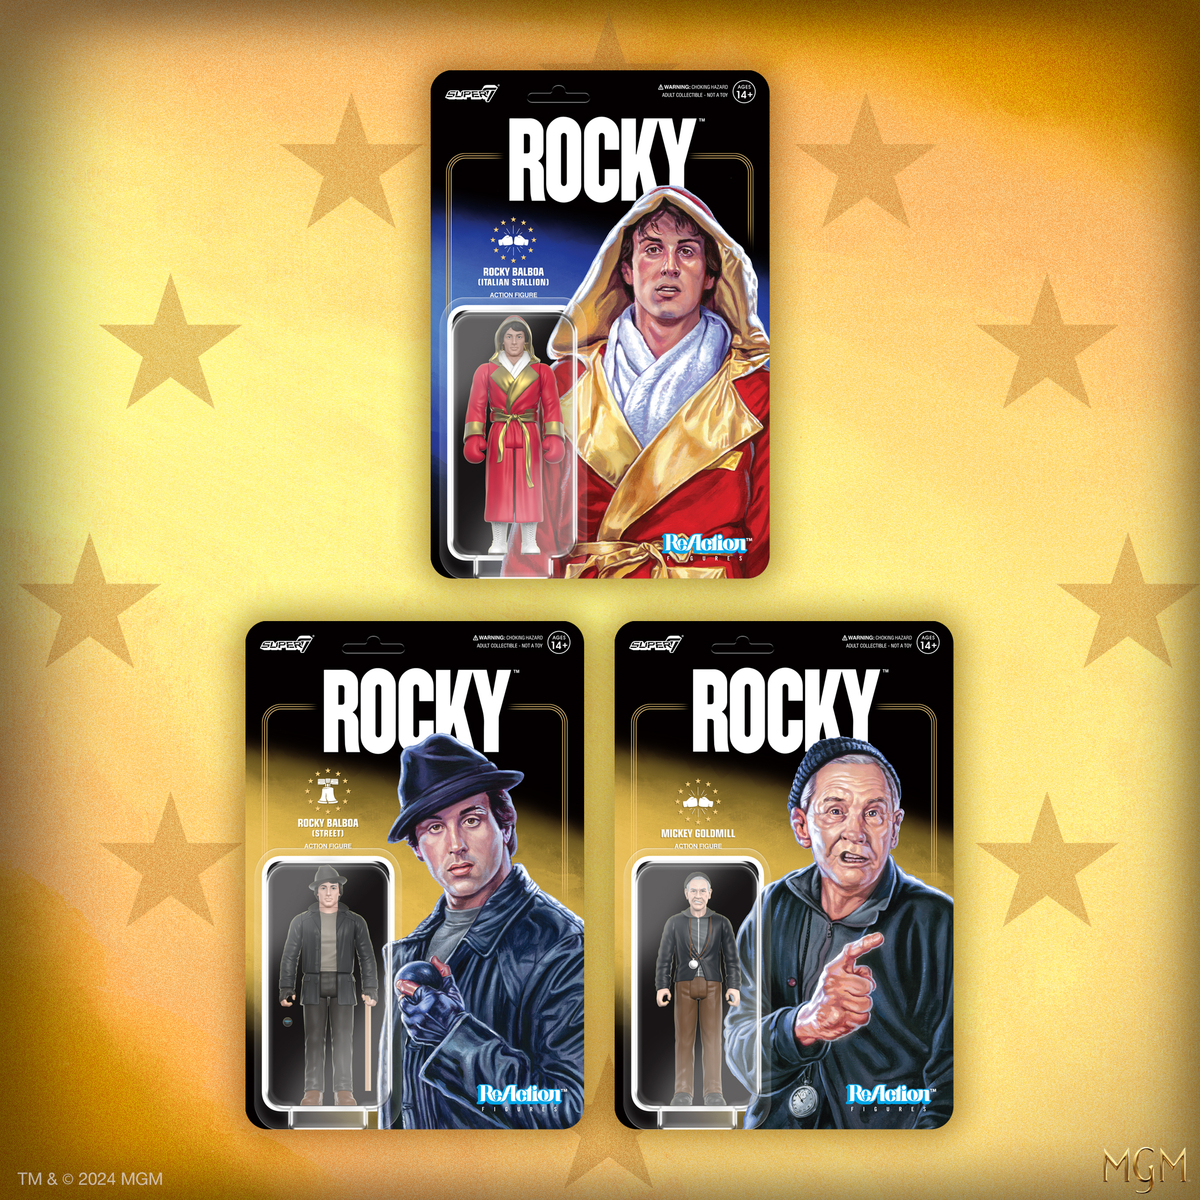 🥊 Rocky ReAction Figures Wave 3 #Giveaway! 🥊 We're giving away a complete set including Rocky (Italian Stallion), Rocky (Street), and Mickey! Here's how to enter: 1. Follow us @super7store 2. Like this post 3. Comment with your favorite Rocky movie quote